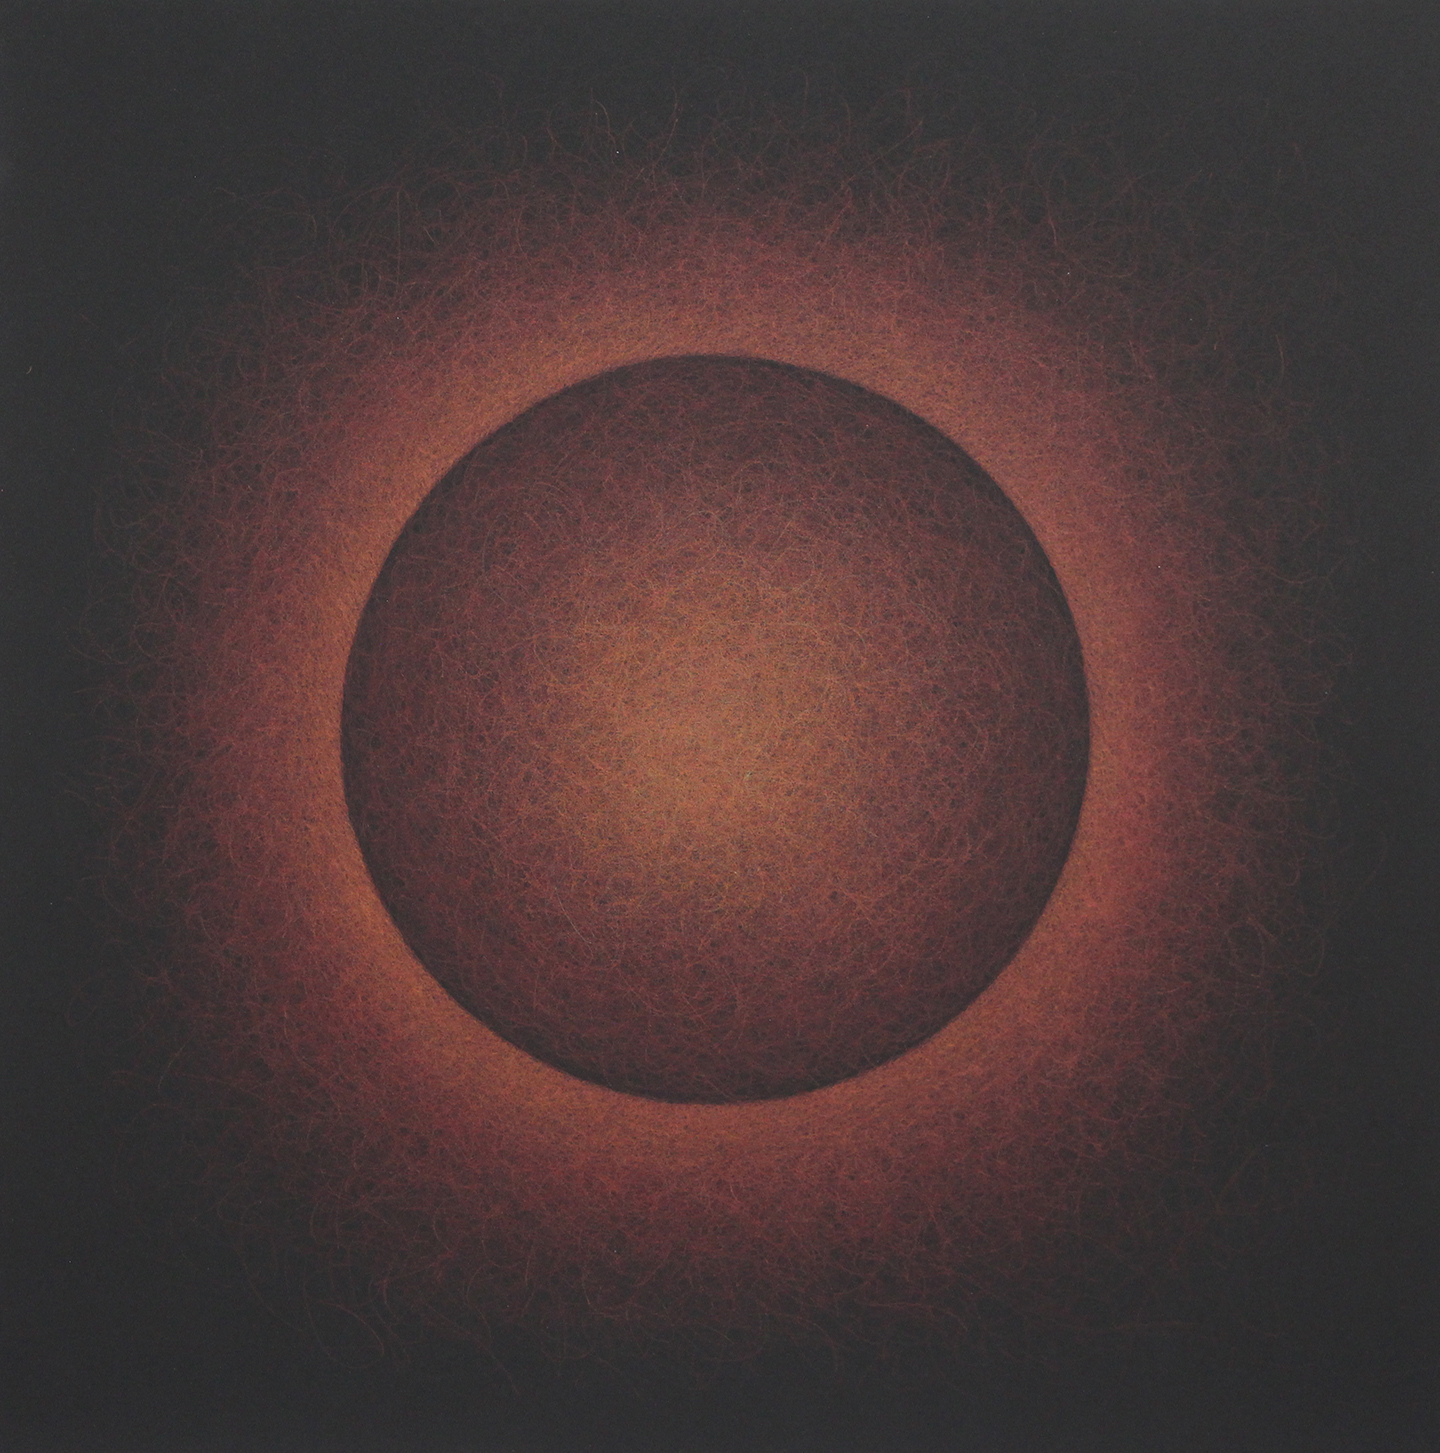 Quantum Entanglement (Backlit Red Sphere 3) , 2022, colored pencil on museum board, 20 x 20"